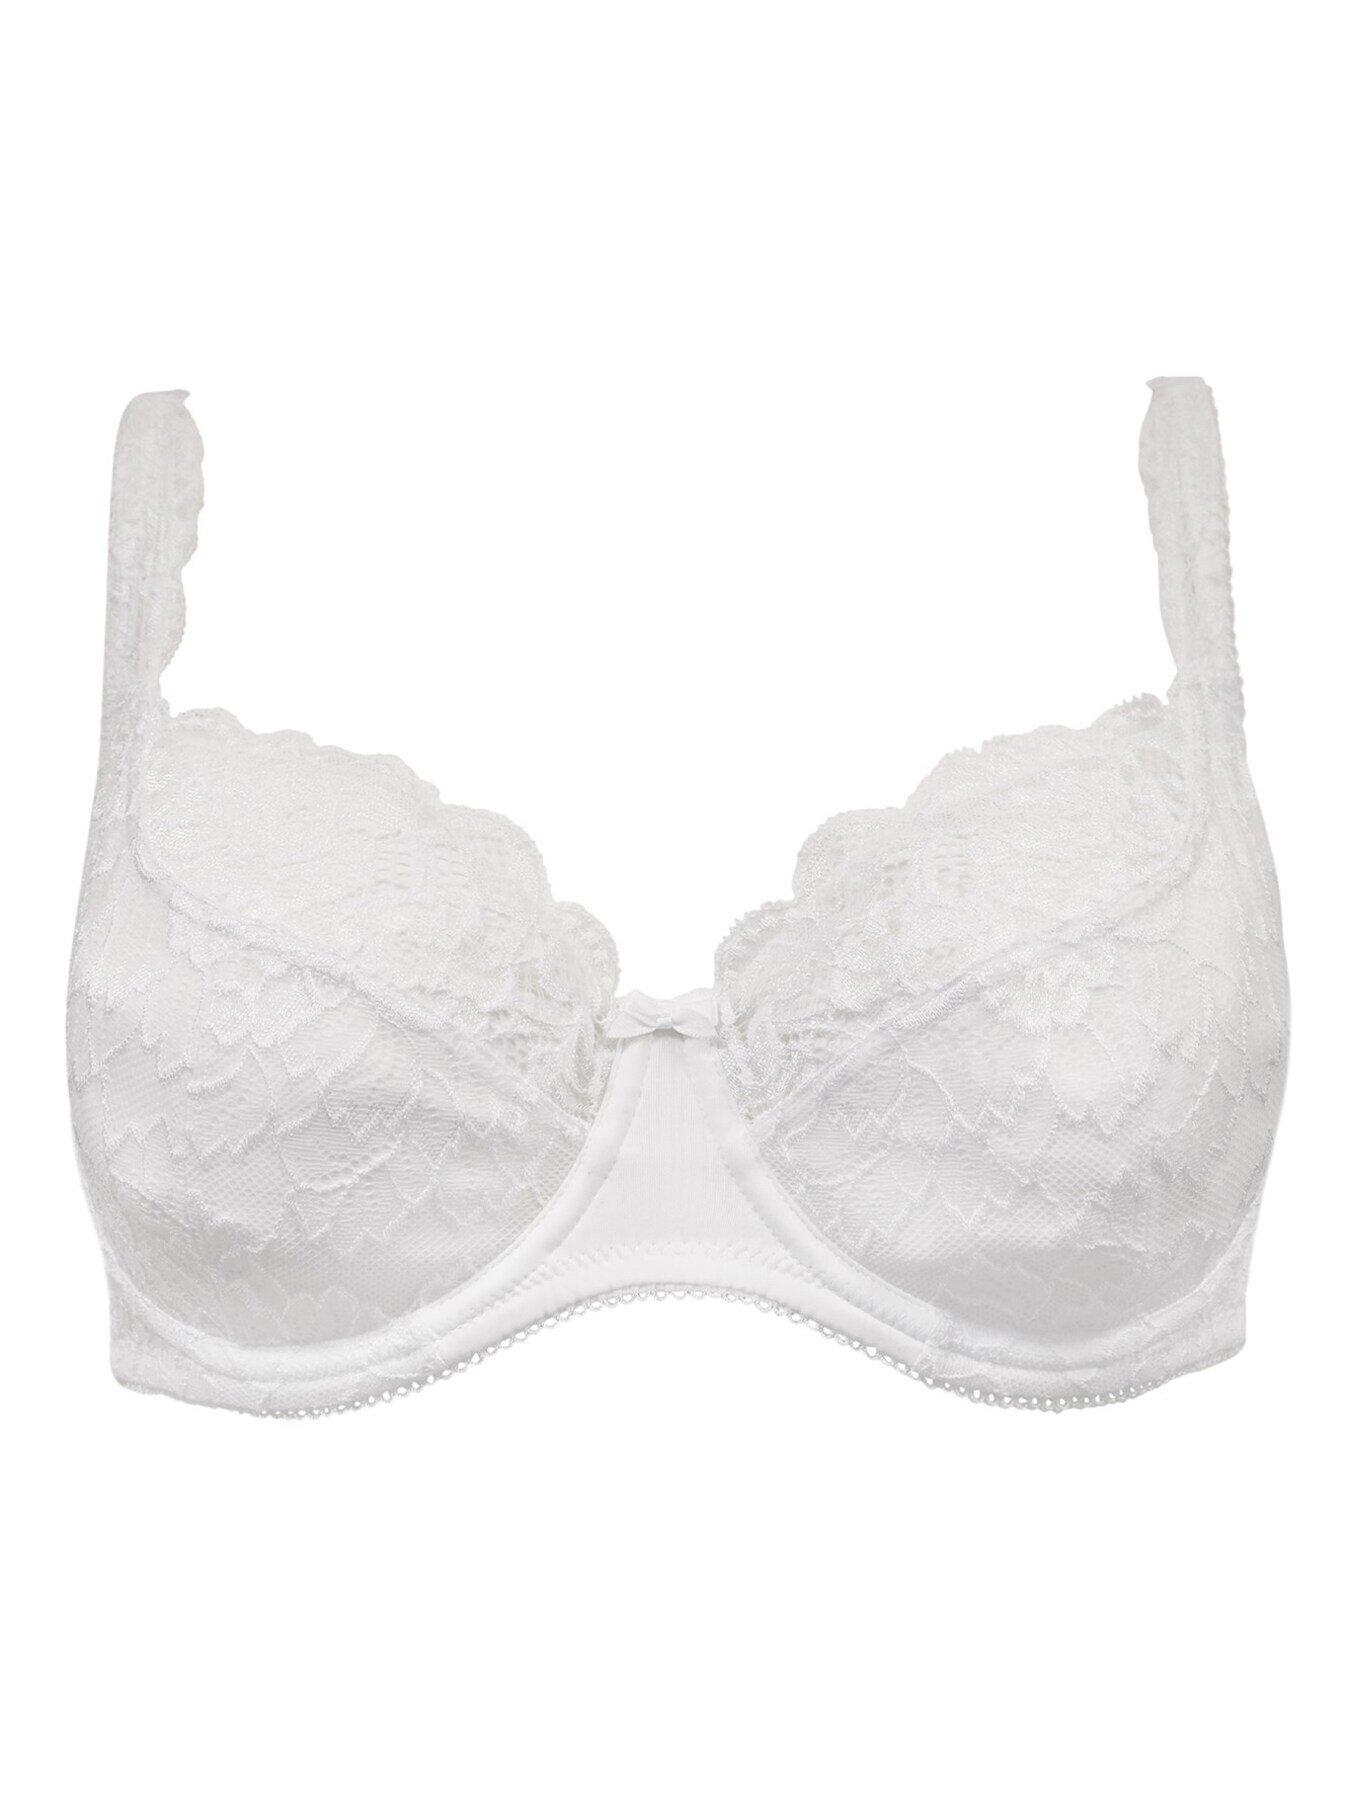 Pour Moi Forever Fiore Full Cup Bra - White | very.co.uk